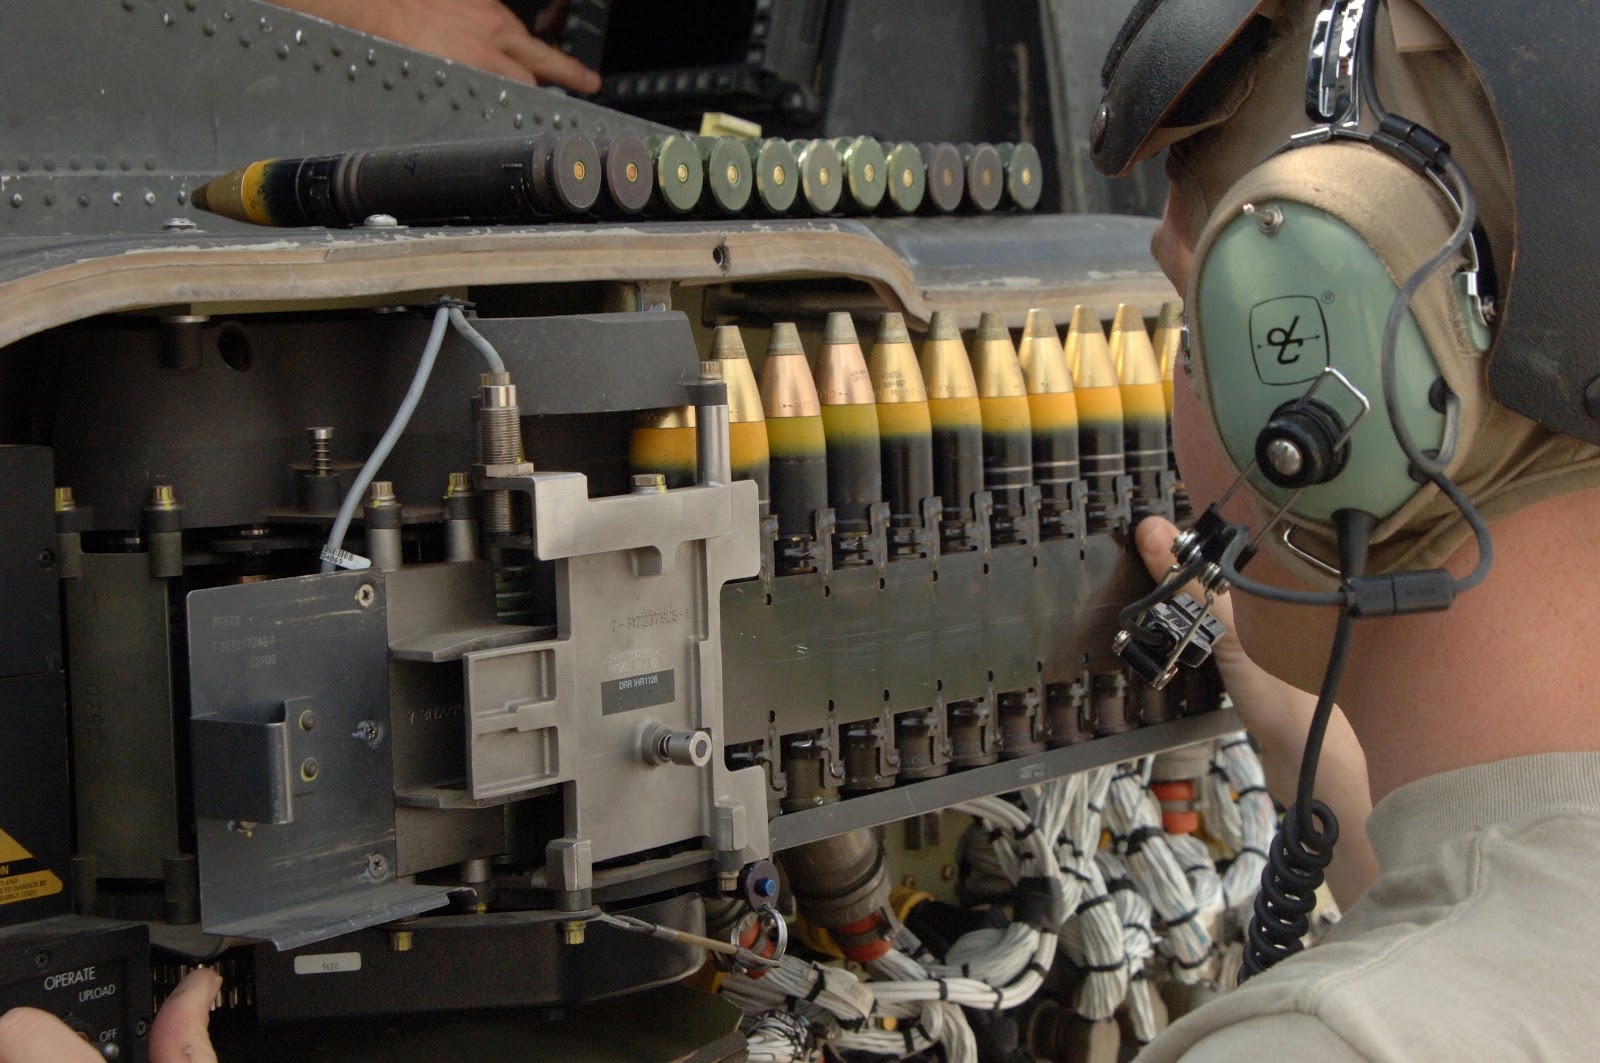 Rounds being loaded into an AH-64D Longbow Apache, April 2007. (Wikimedia Commons)